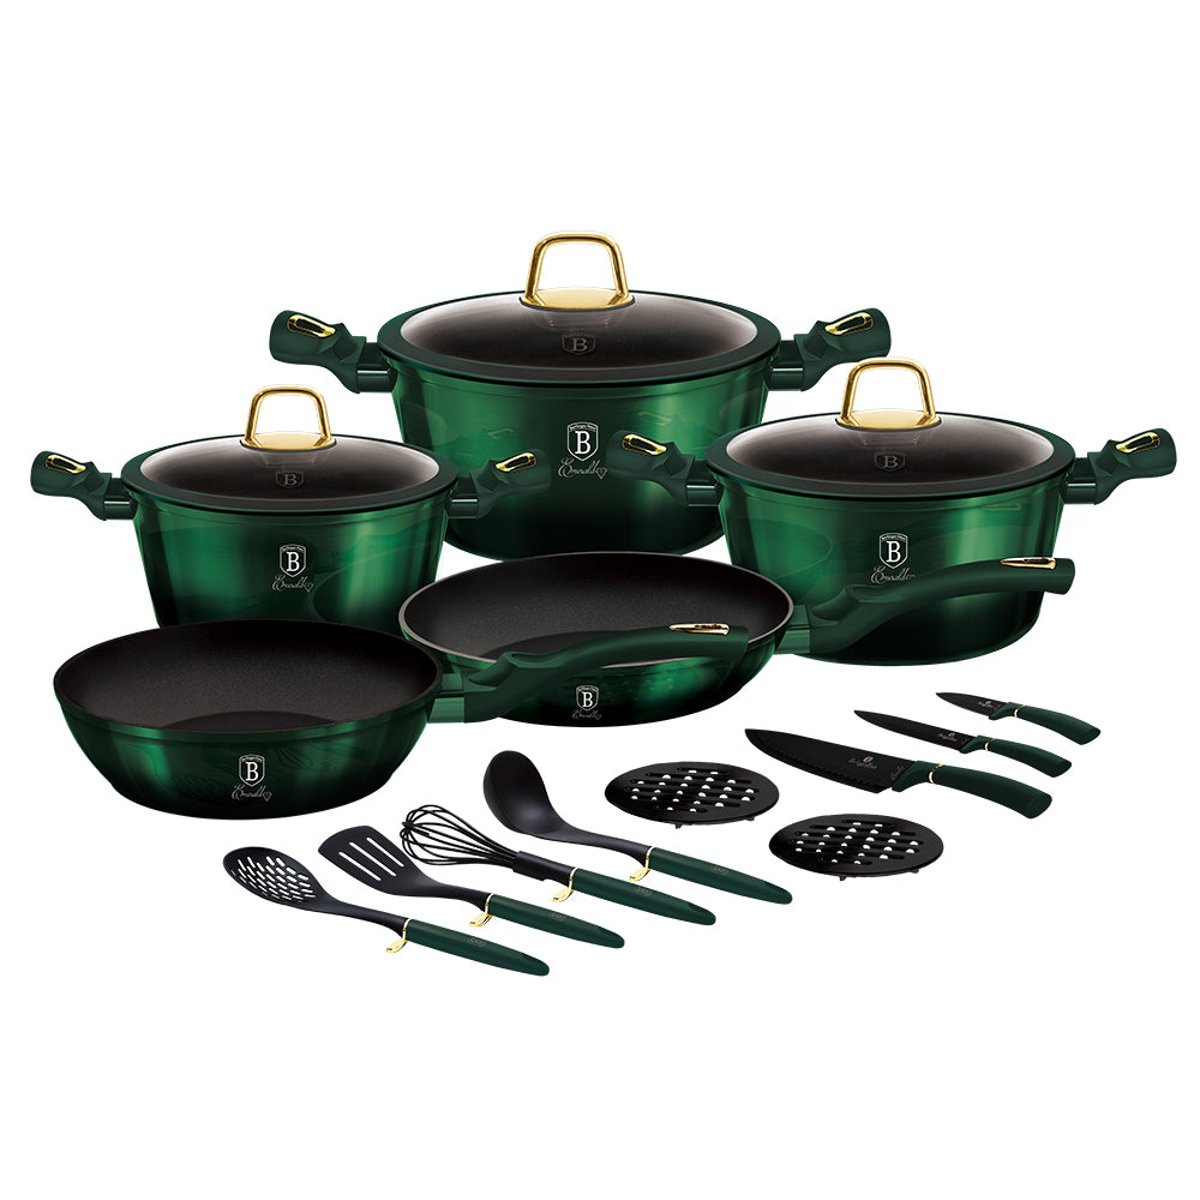 Country Kitchen Nonstick Induction Cookware Sets - 11 Piece Cast Aluminum  Pots and Pans with BAKELITE Handles , Glass Lids -Chocolate Brown